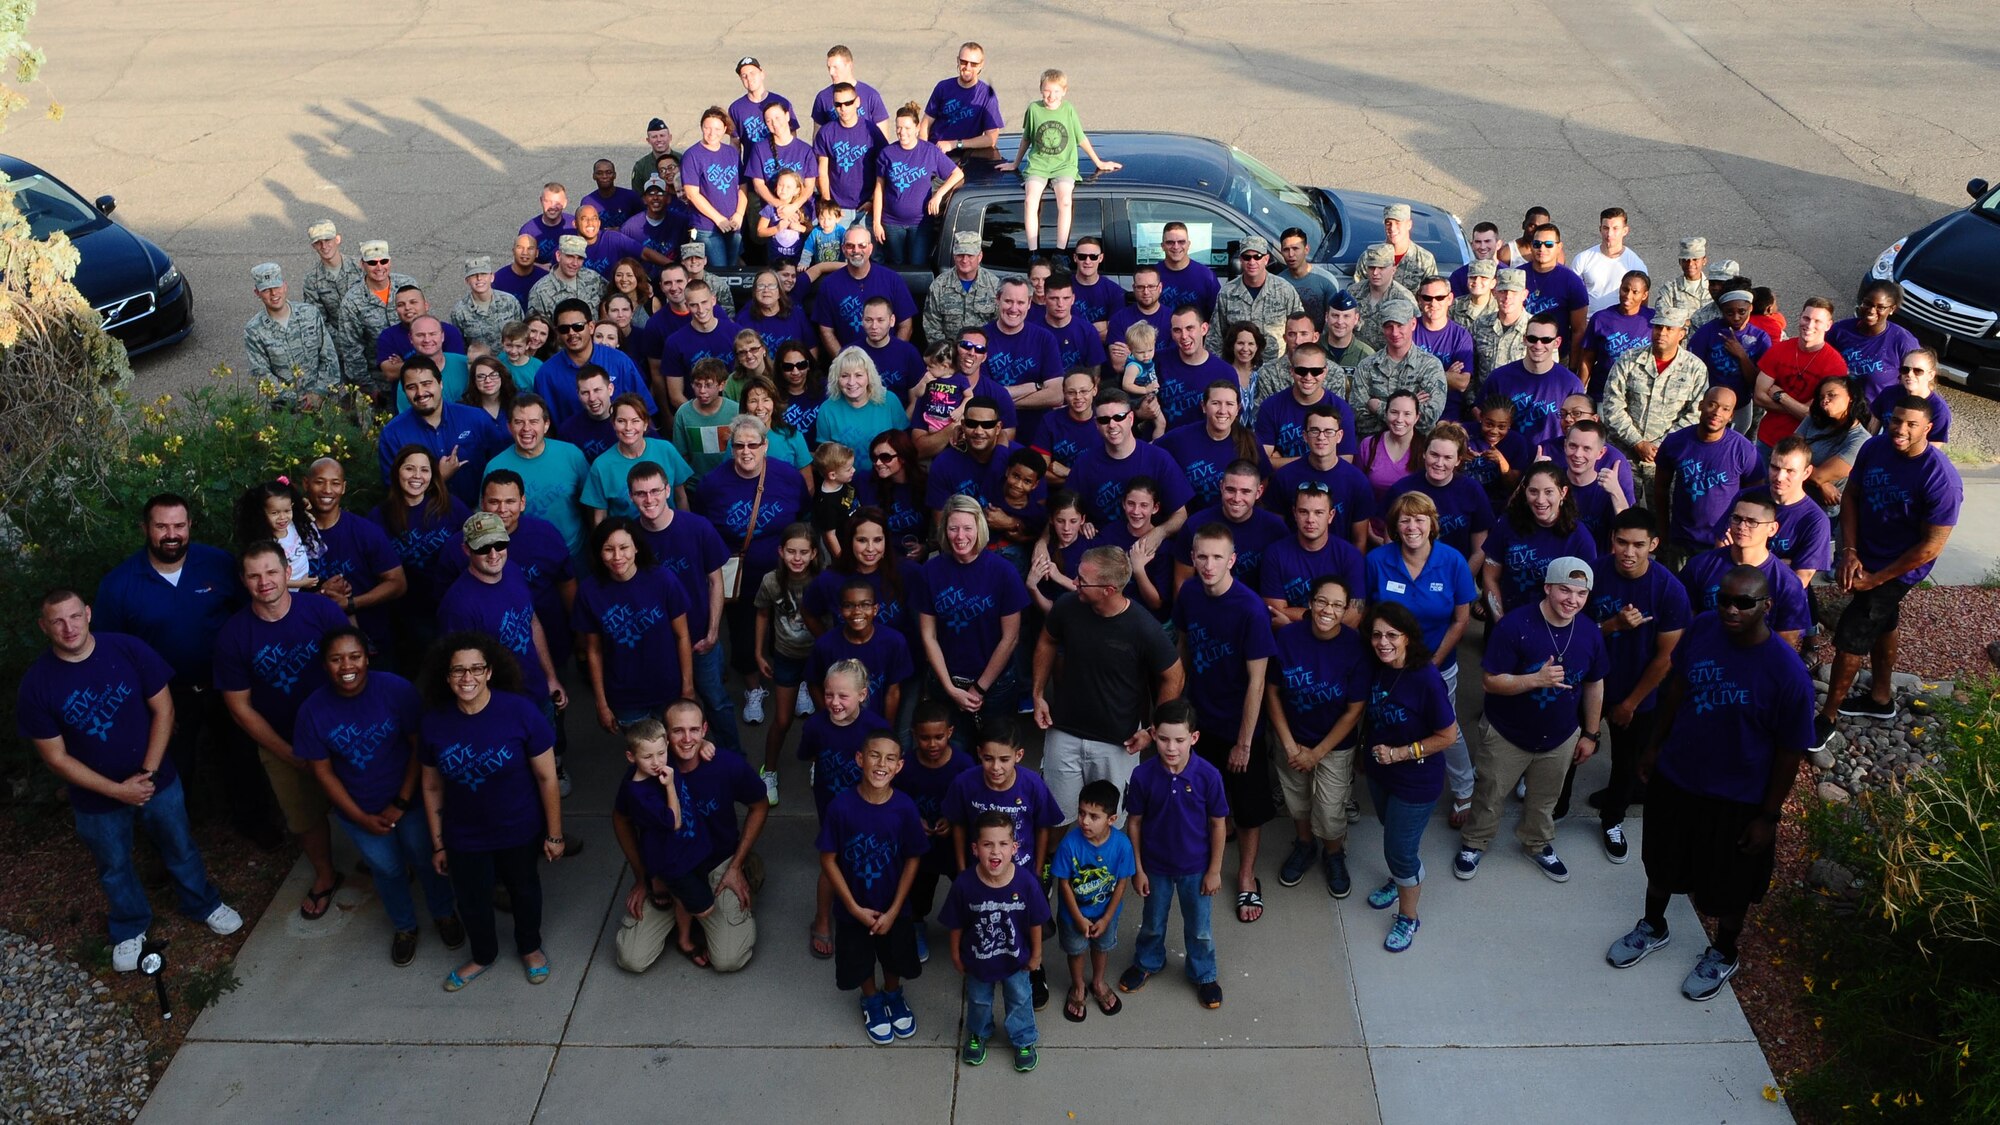 Participants in this year’s Big Give pose for a photo outside Club Holloman at the Big Give after party on Aug 21.This year’s Big Give consisted of 540 volunteers in 40 teams working a total of 7,292 hours and saving the community $458,431.98. 